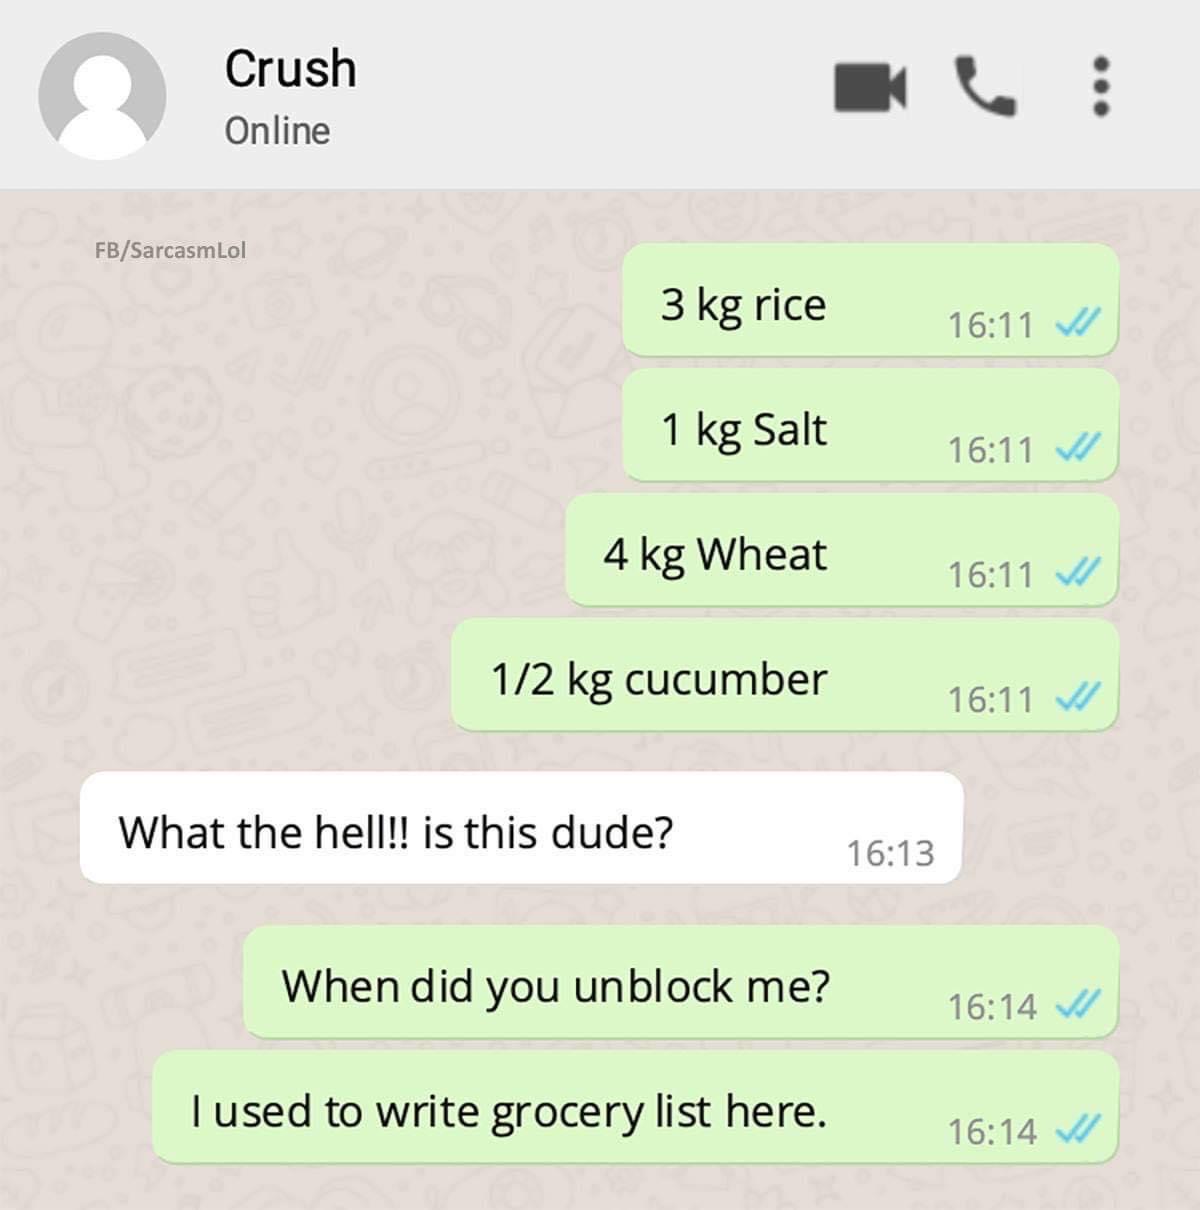 number - Crush Online FbSarcasmLol 3 kg rice V 1 kg Salt 4 kg Wheat 12 kg cucumber W What the hell!! is this dude? When did you unblock me? I used to write grocery list here.